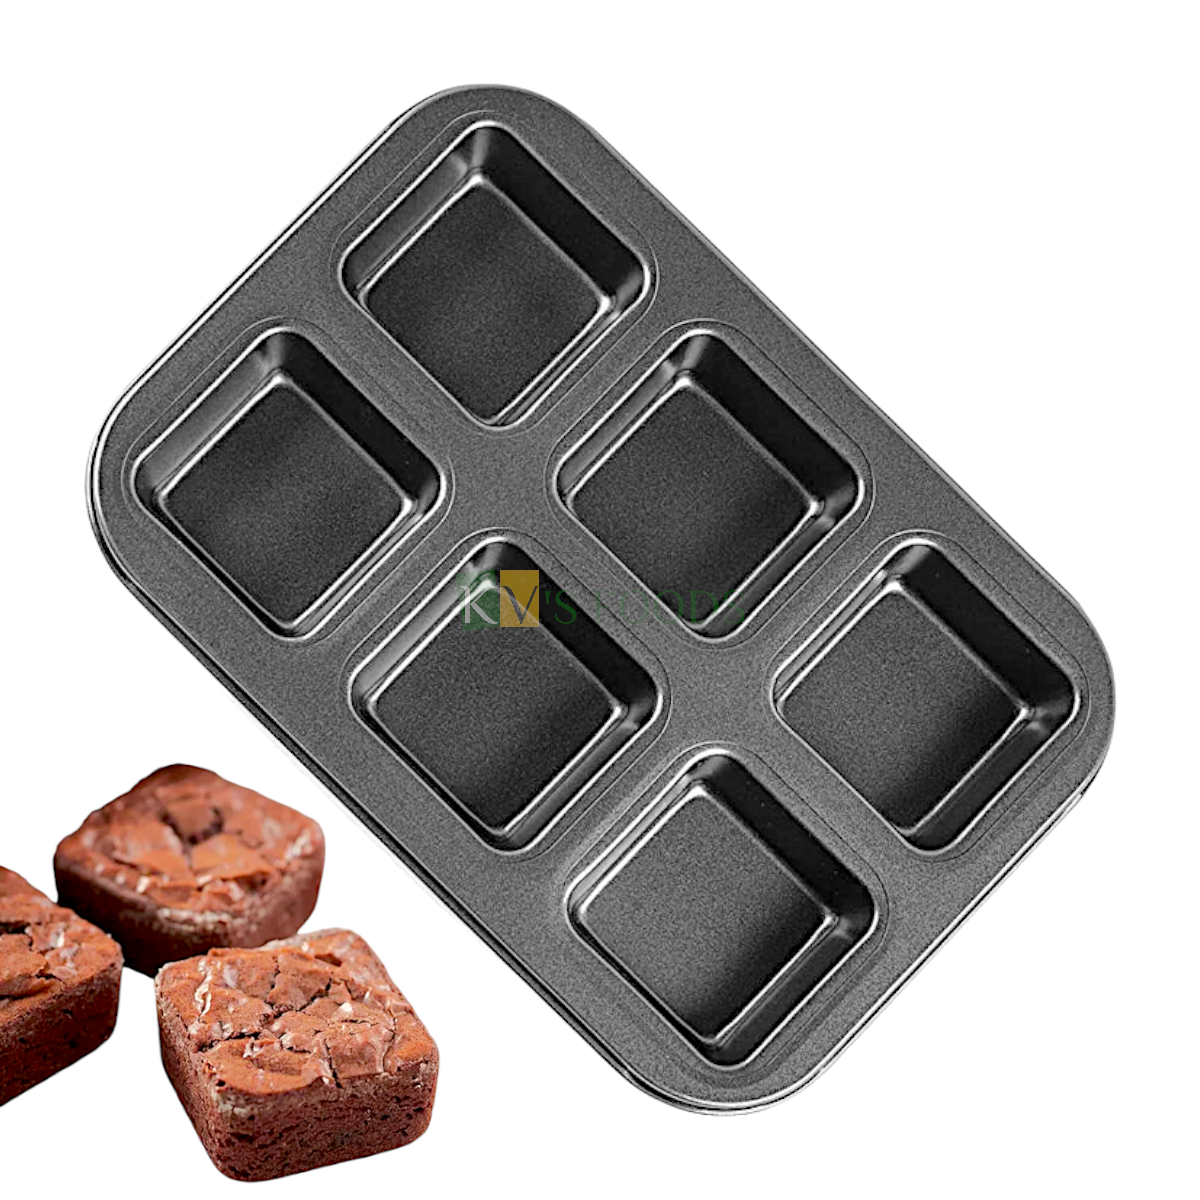 1PC 6 Cavity Baking Non-Stick Square Brownie Cake Mould Panettone Cake Bakeware Pan Mould for Cupcakes, Loafs, Bread Mousse Pudding Plum Tea Cheese Keto Fat Bombs, Cakes Chocolate Mould Tins Oven Tray